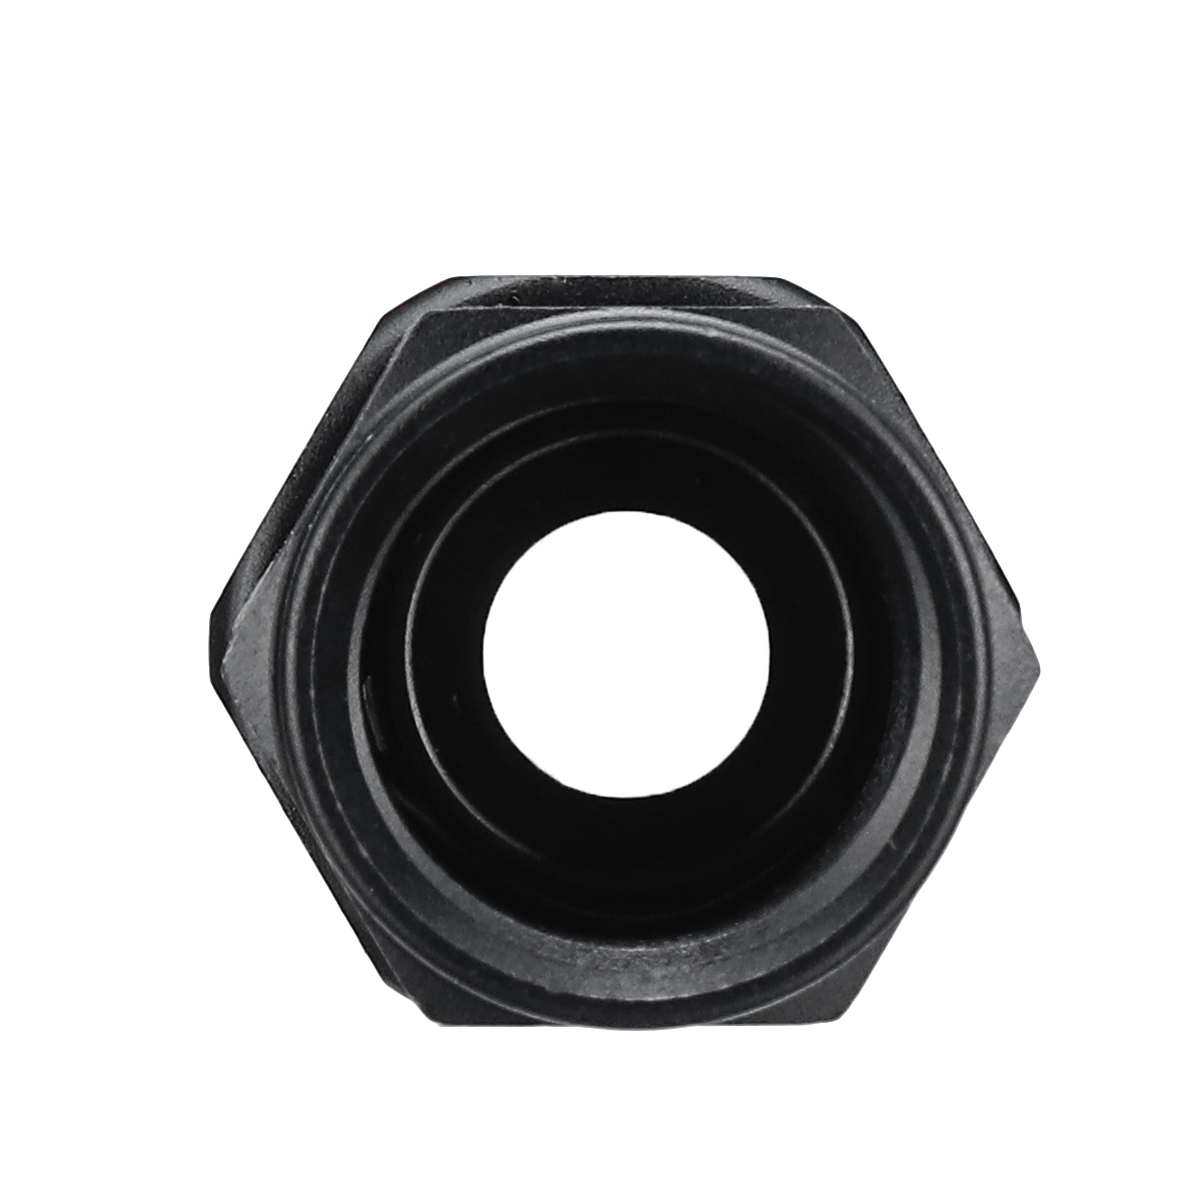 AN-6-Straight-Stealth-Black-Fuel-Hose-Pipes-Fittings-AN6-Connector-1361067-6